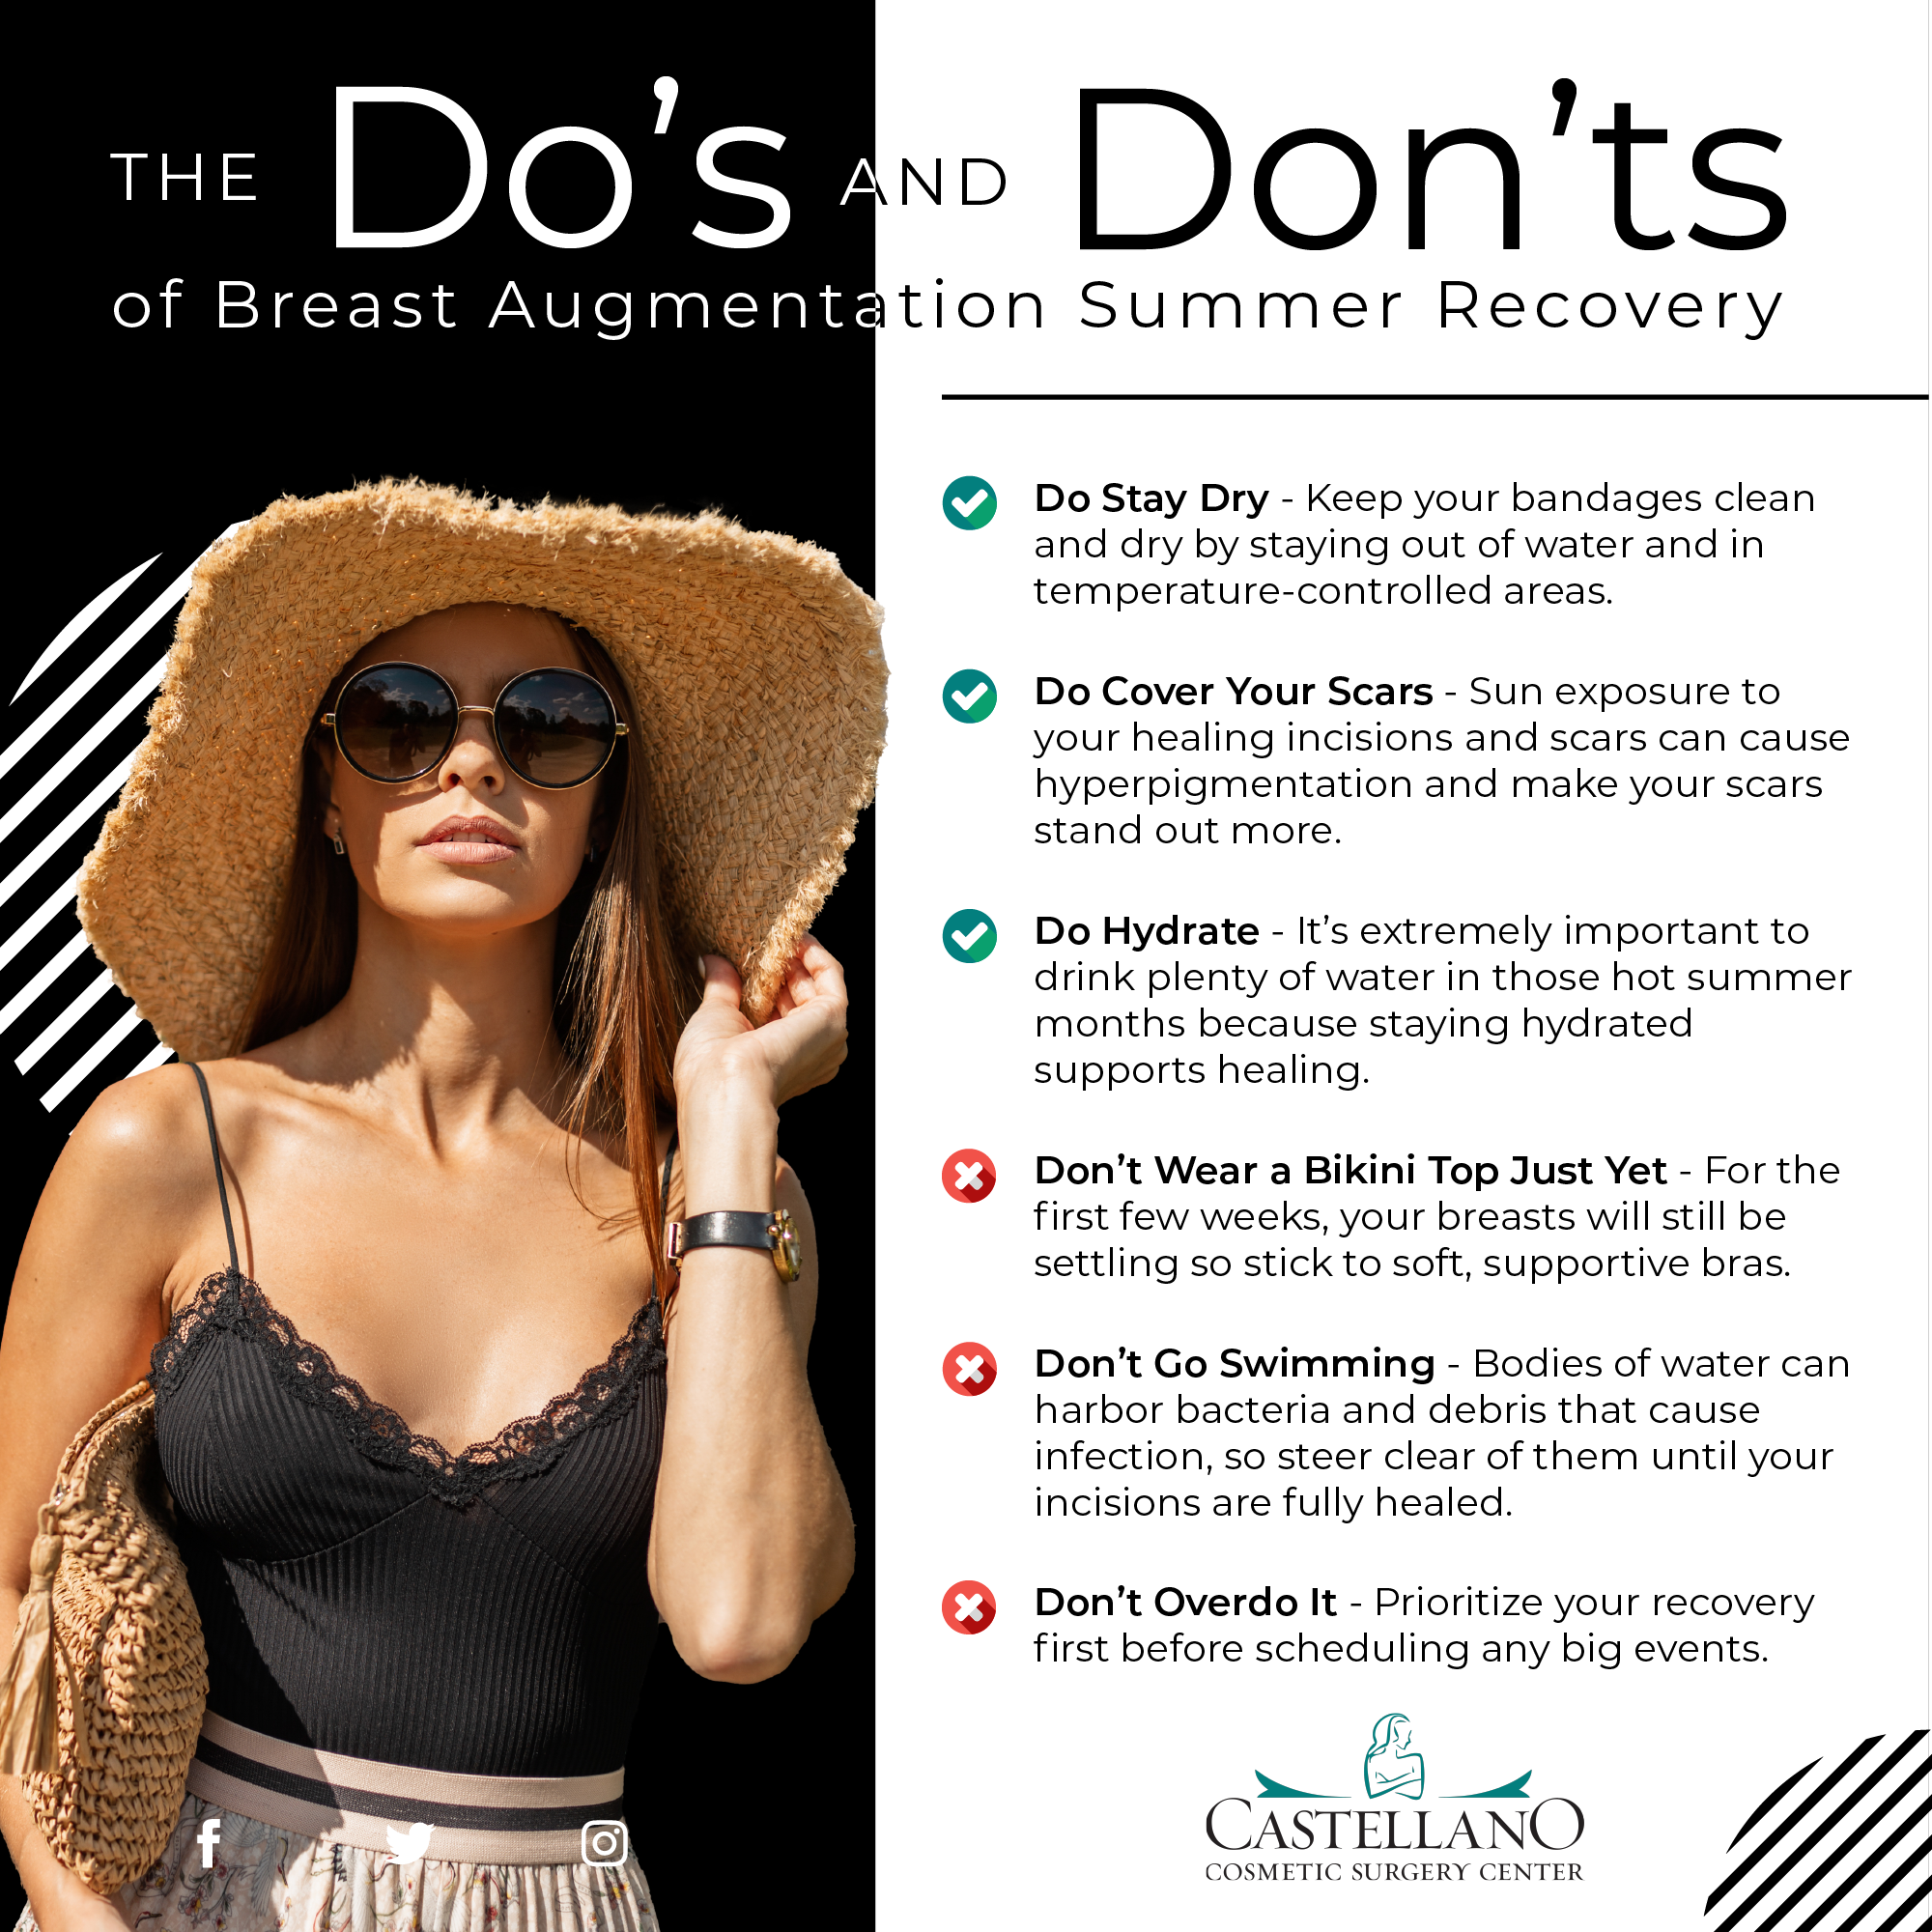 The Do's and Don'ts of Breast Augmentation Summer Recovery